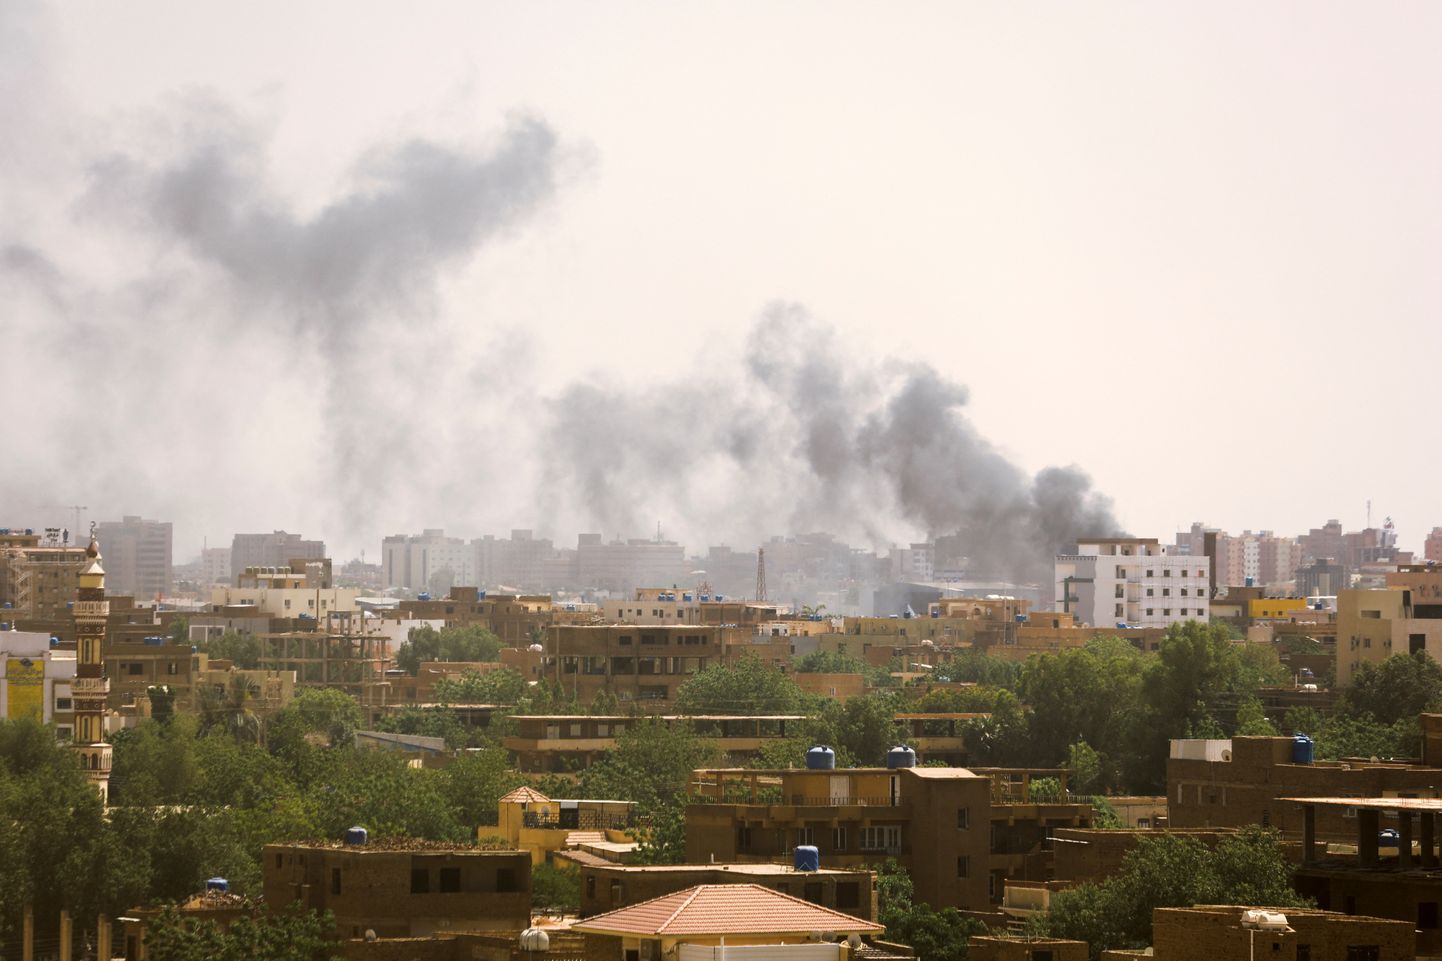 Smoke rises over buildings during clashes between the paramilitary Rapid Support Forces and the army in Khartoum, Sudan April 17, 2023. REUTERS/Stringer   NO RESALES. NO ARCHIVES